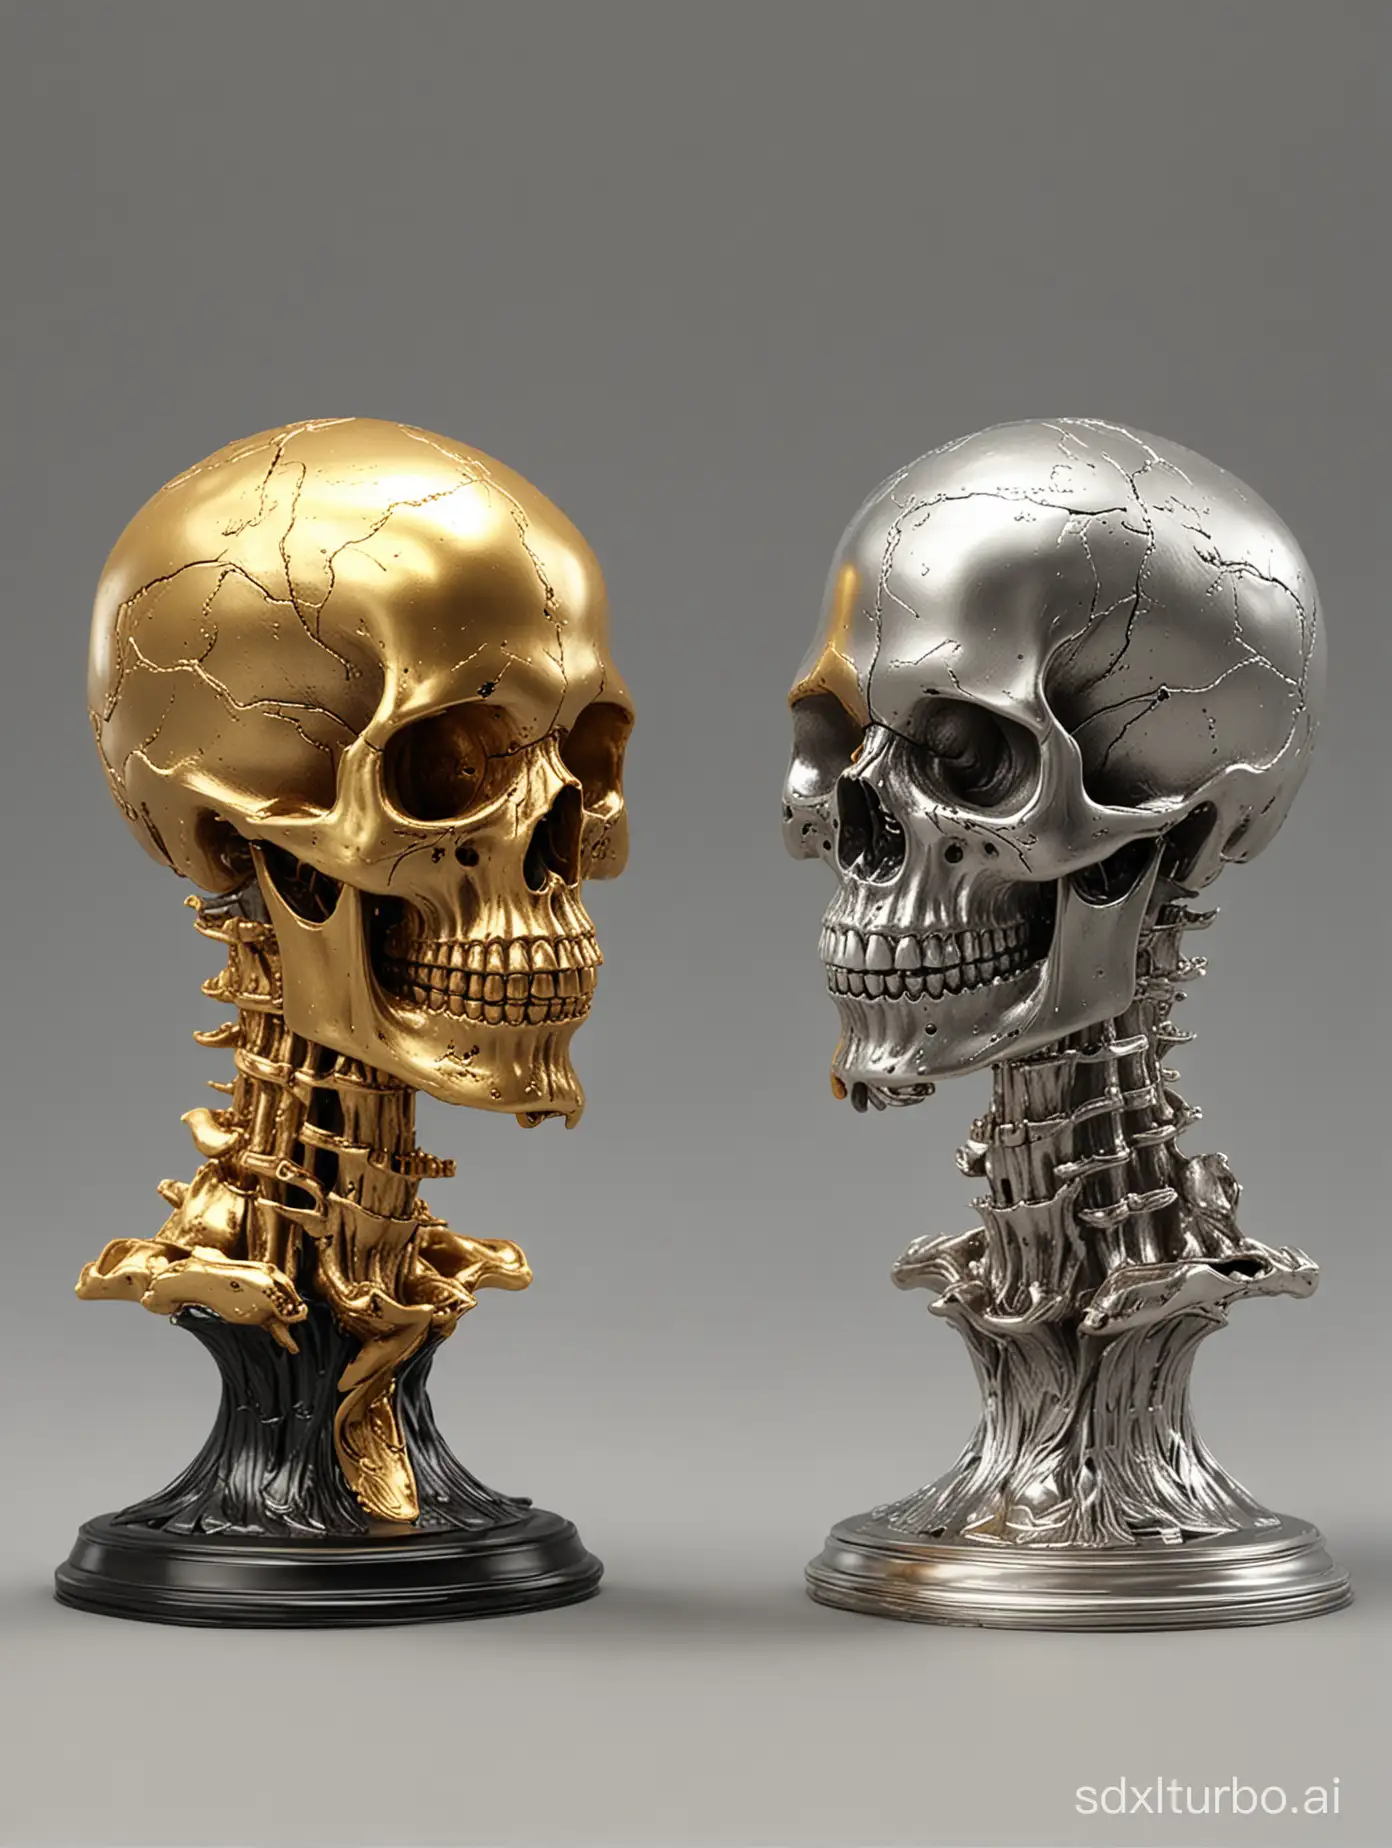 Golden-and-Silver-Skulls-Posed-Together-Masterpiece-of-Delicately-Realistic-Art